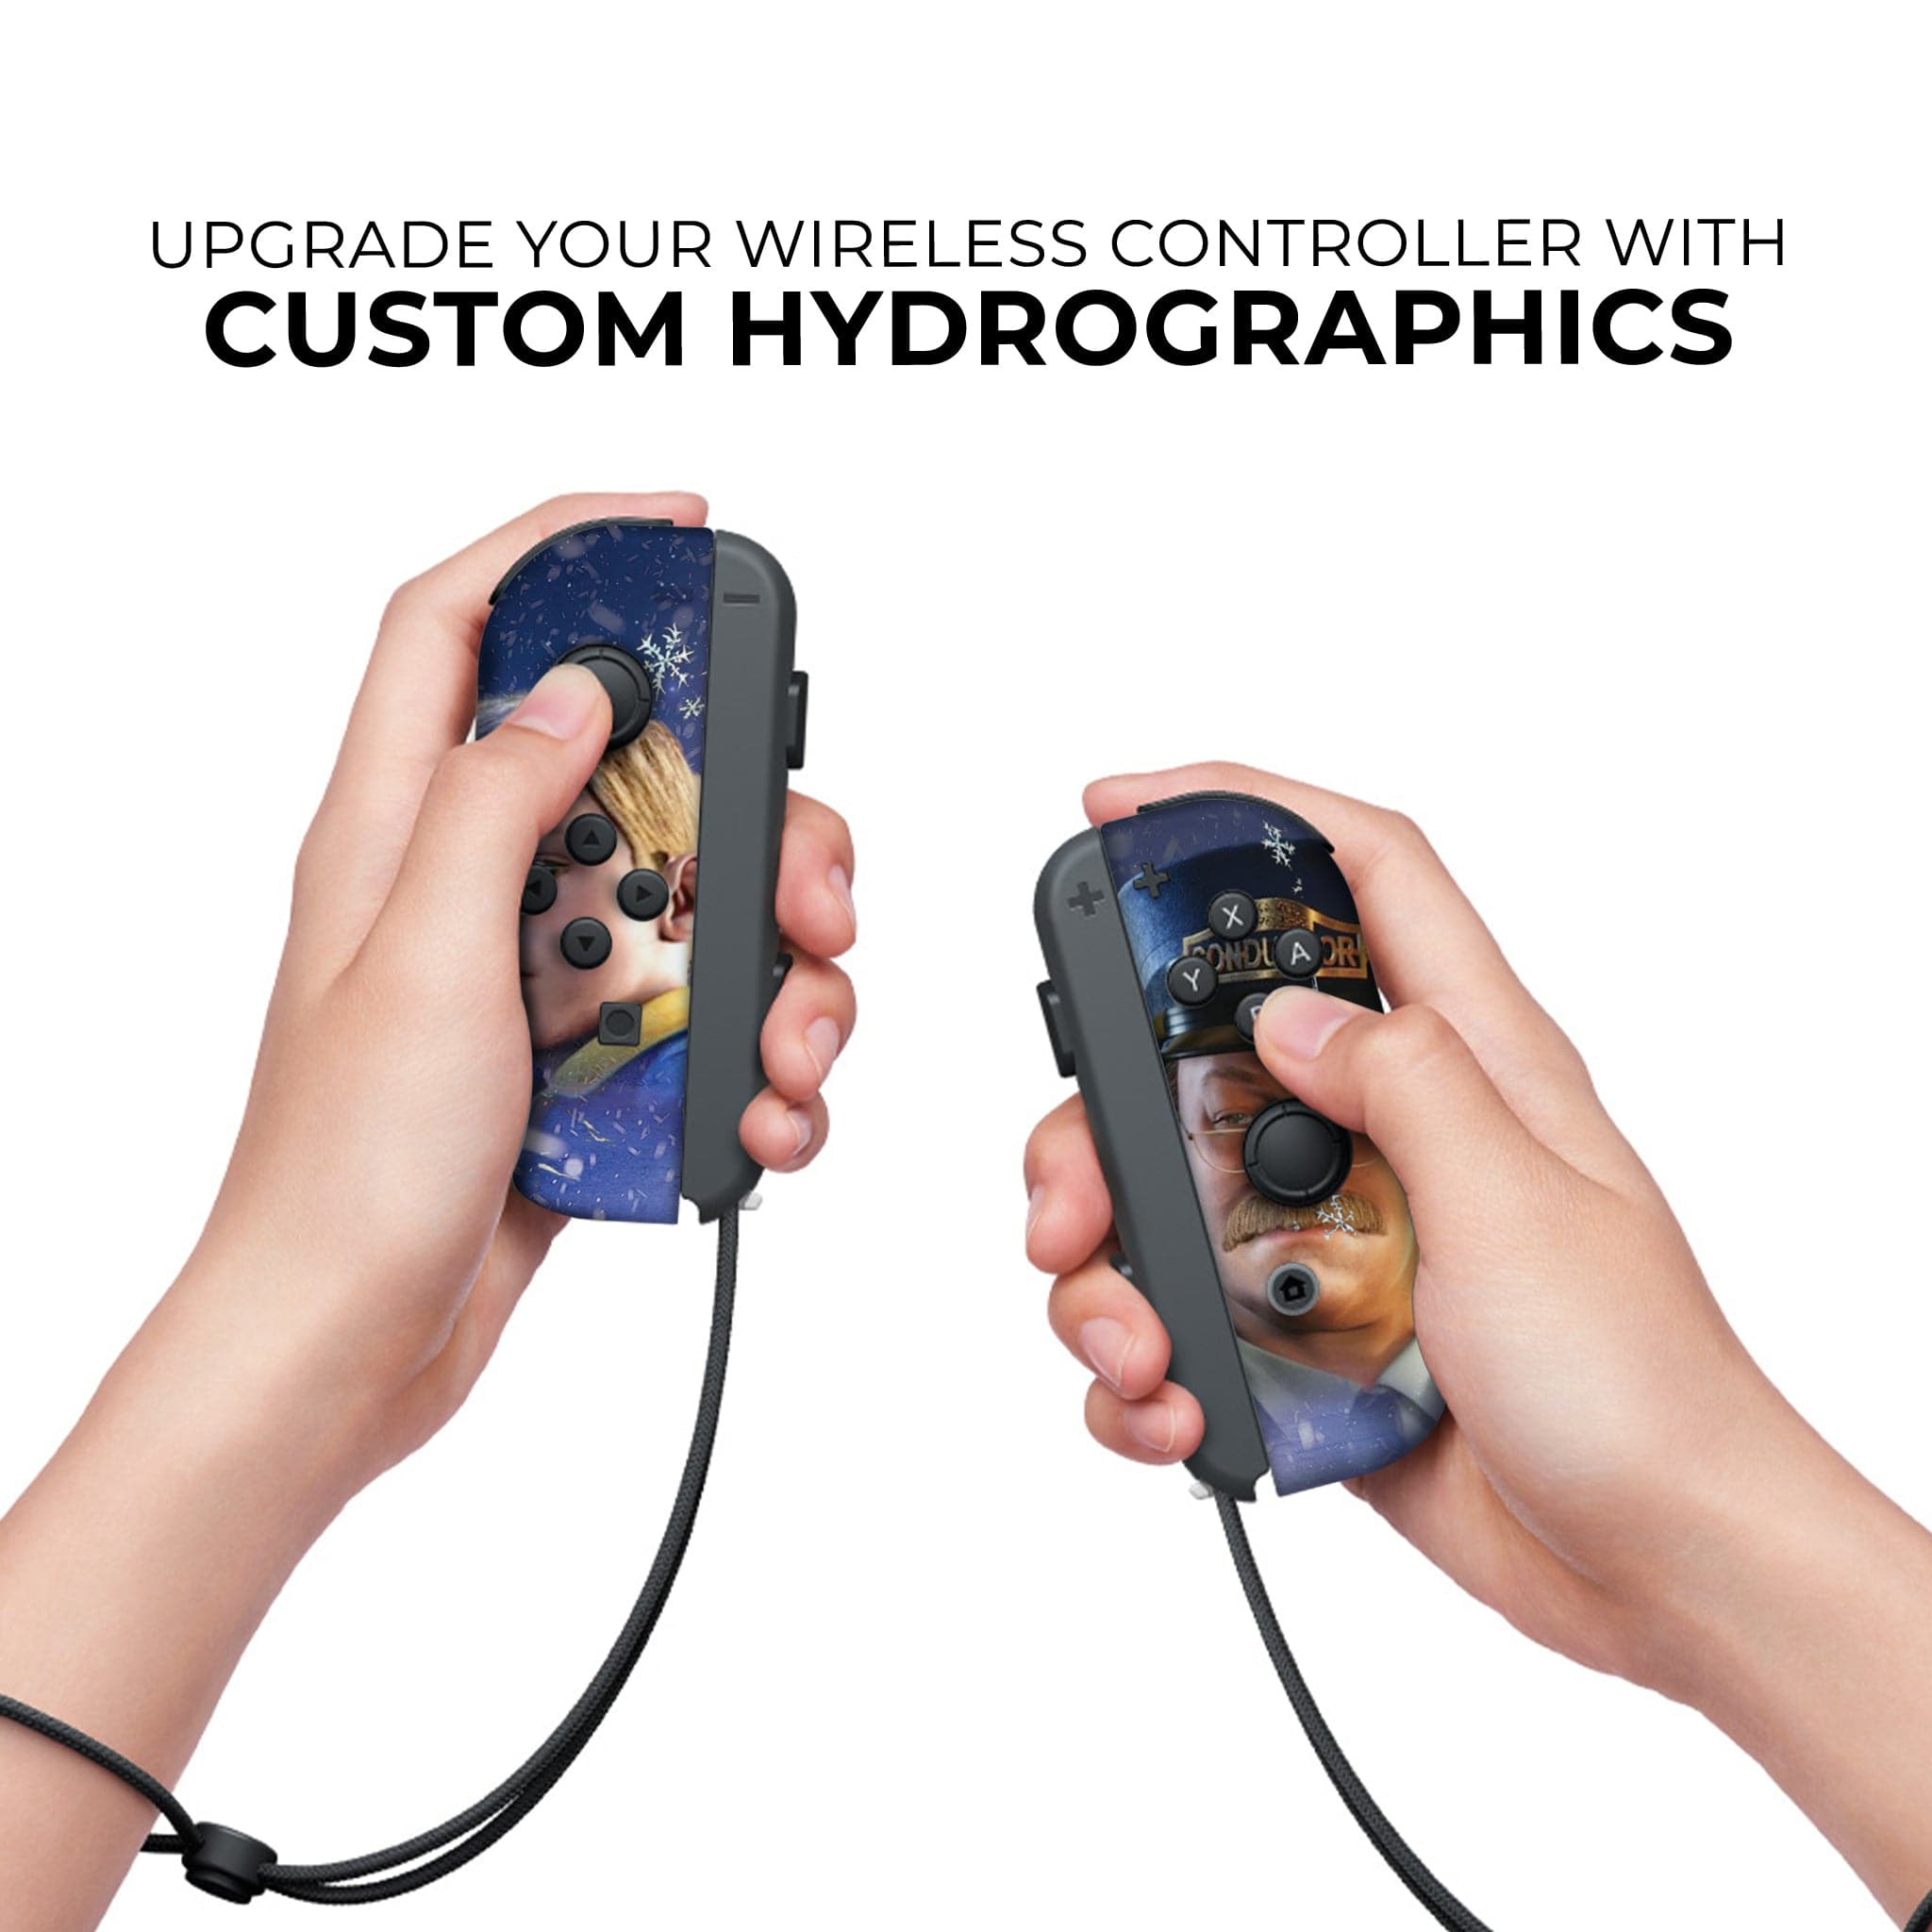 Polar Express Joy-Con Left and Right Switch Controllers by Nintendo